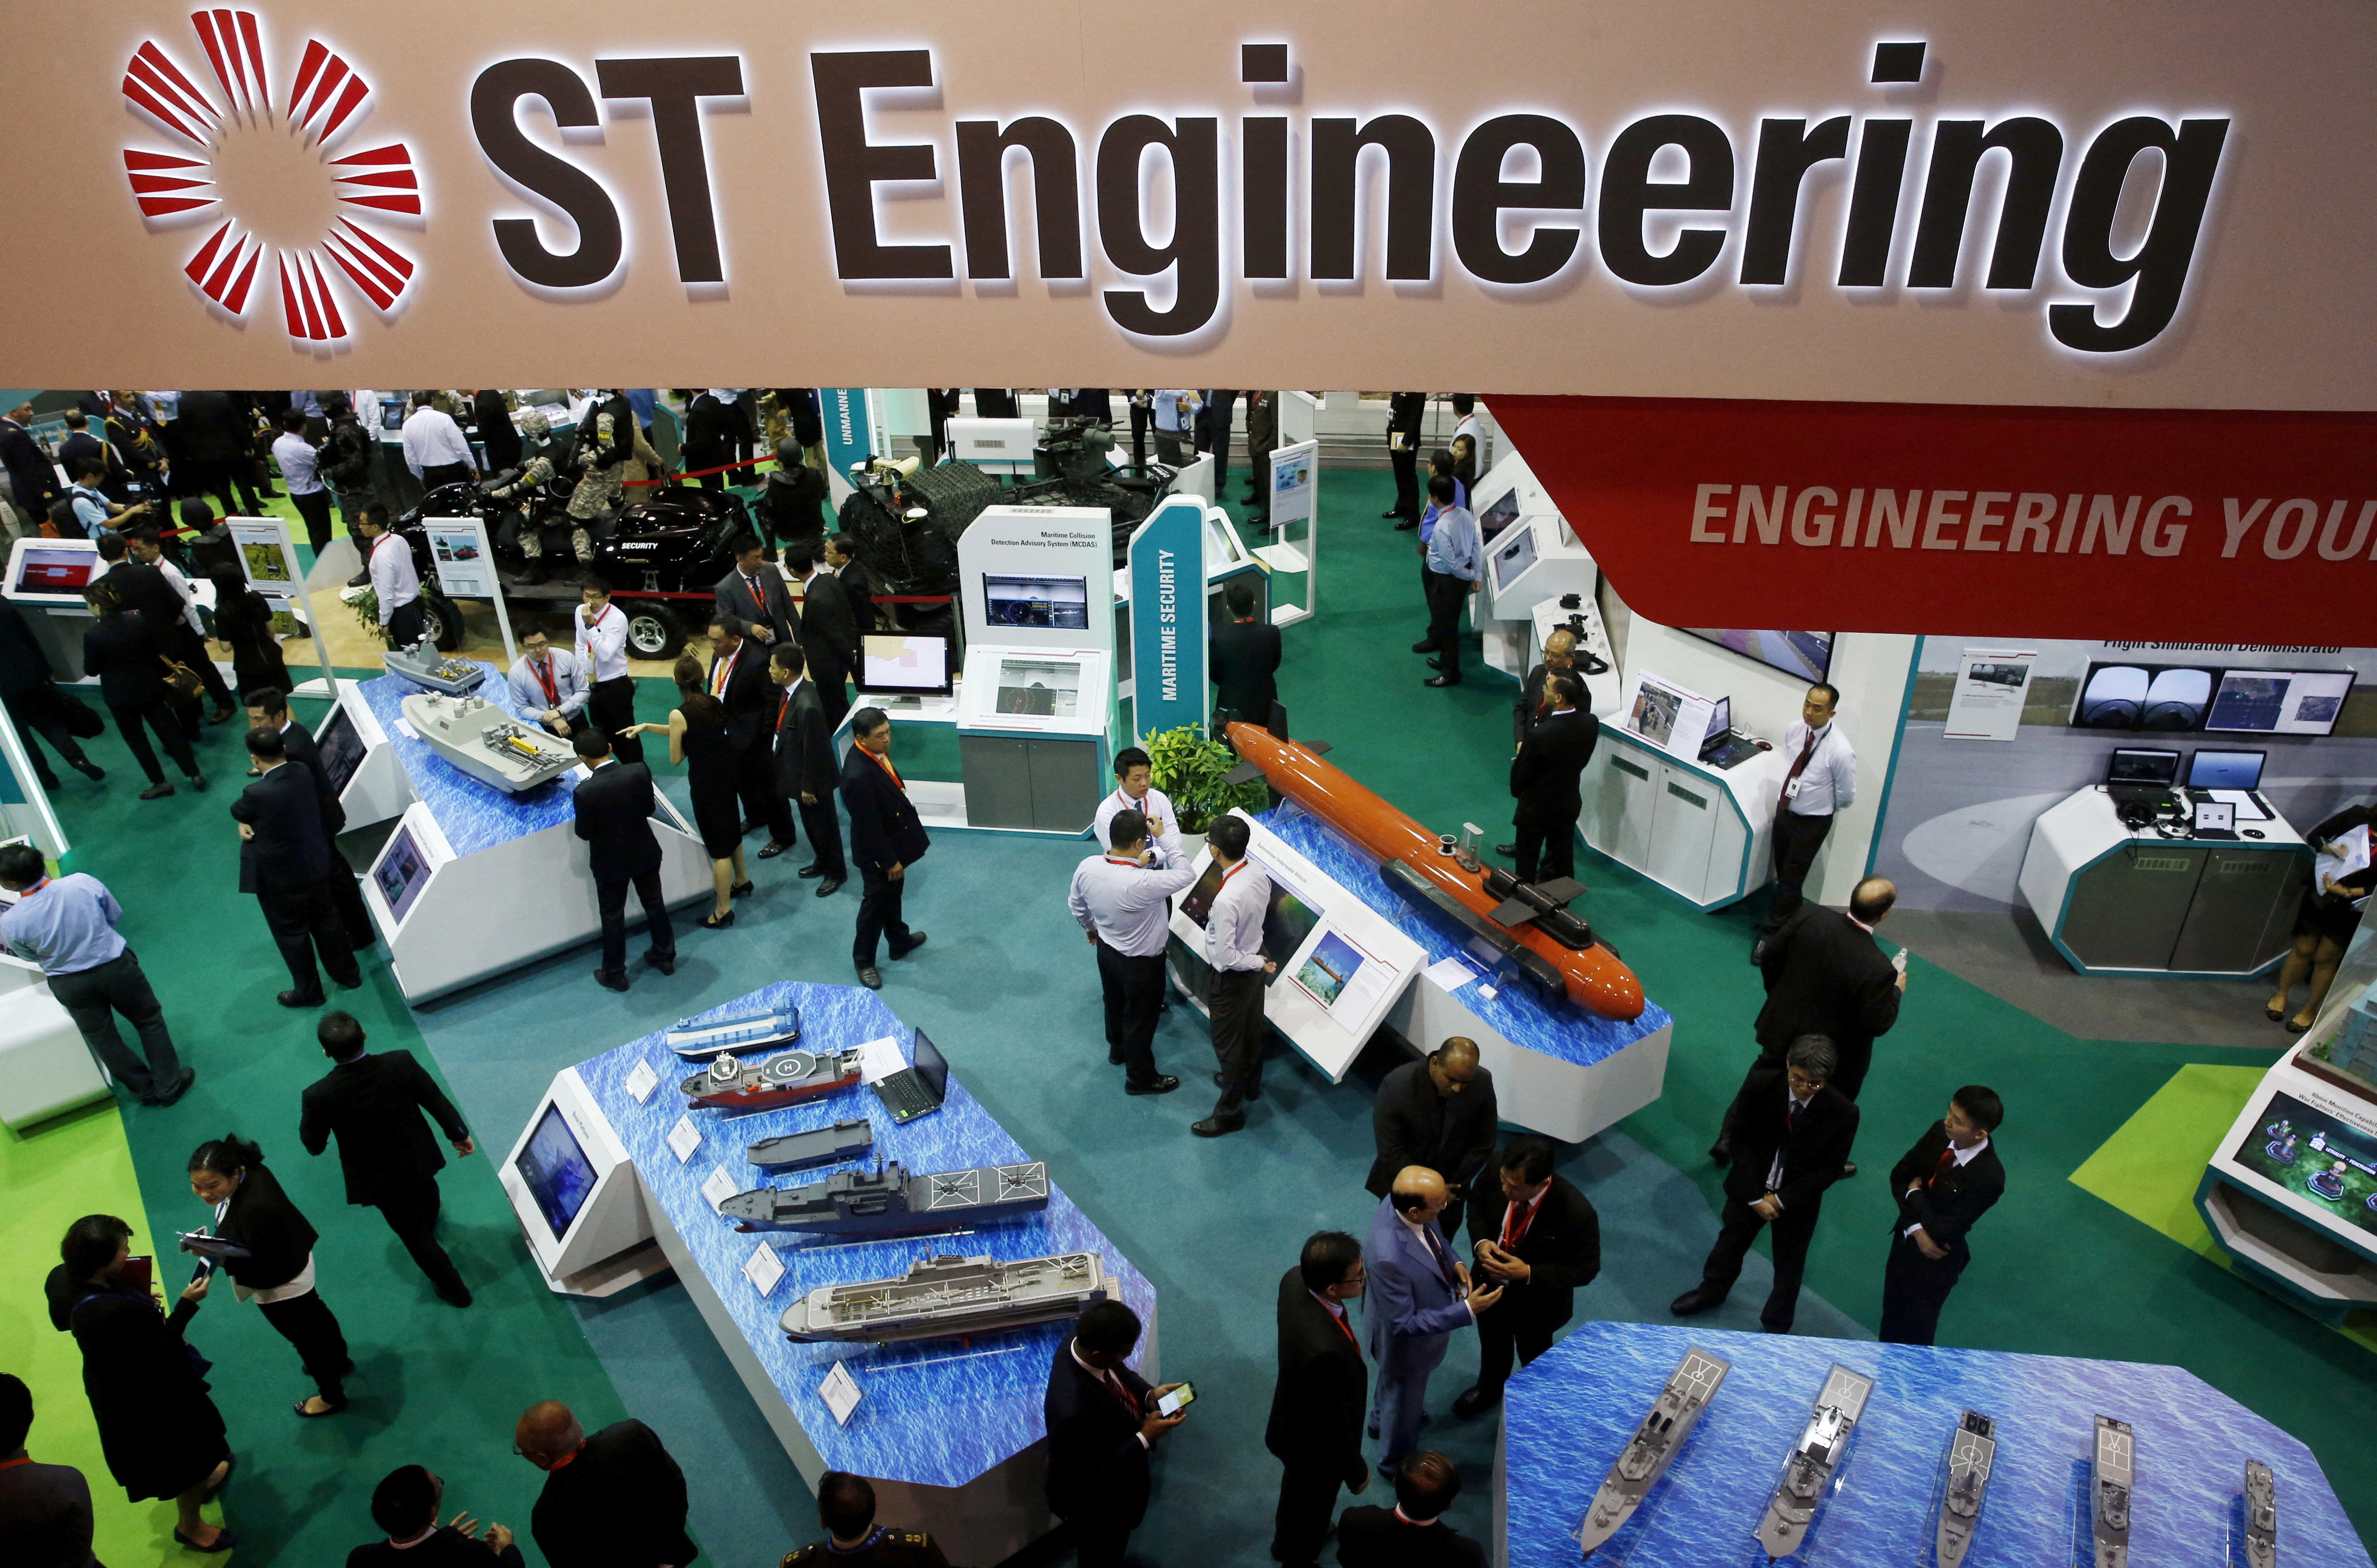 FILE PHOTO: Visitors look at displays at the Singapore Technology (ST) Engineering booth during the opening day of the Singapore Airshow at Changi Exhibition Center